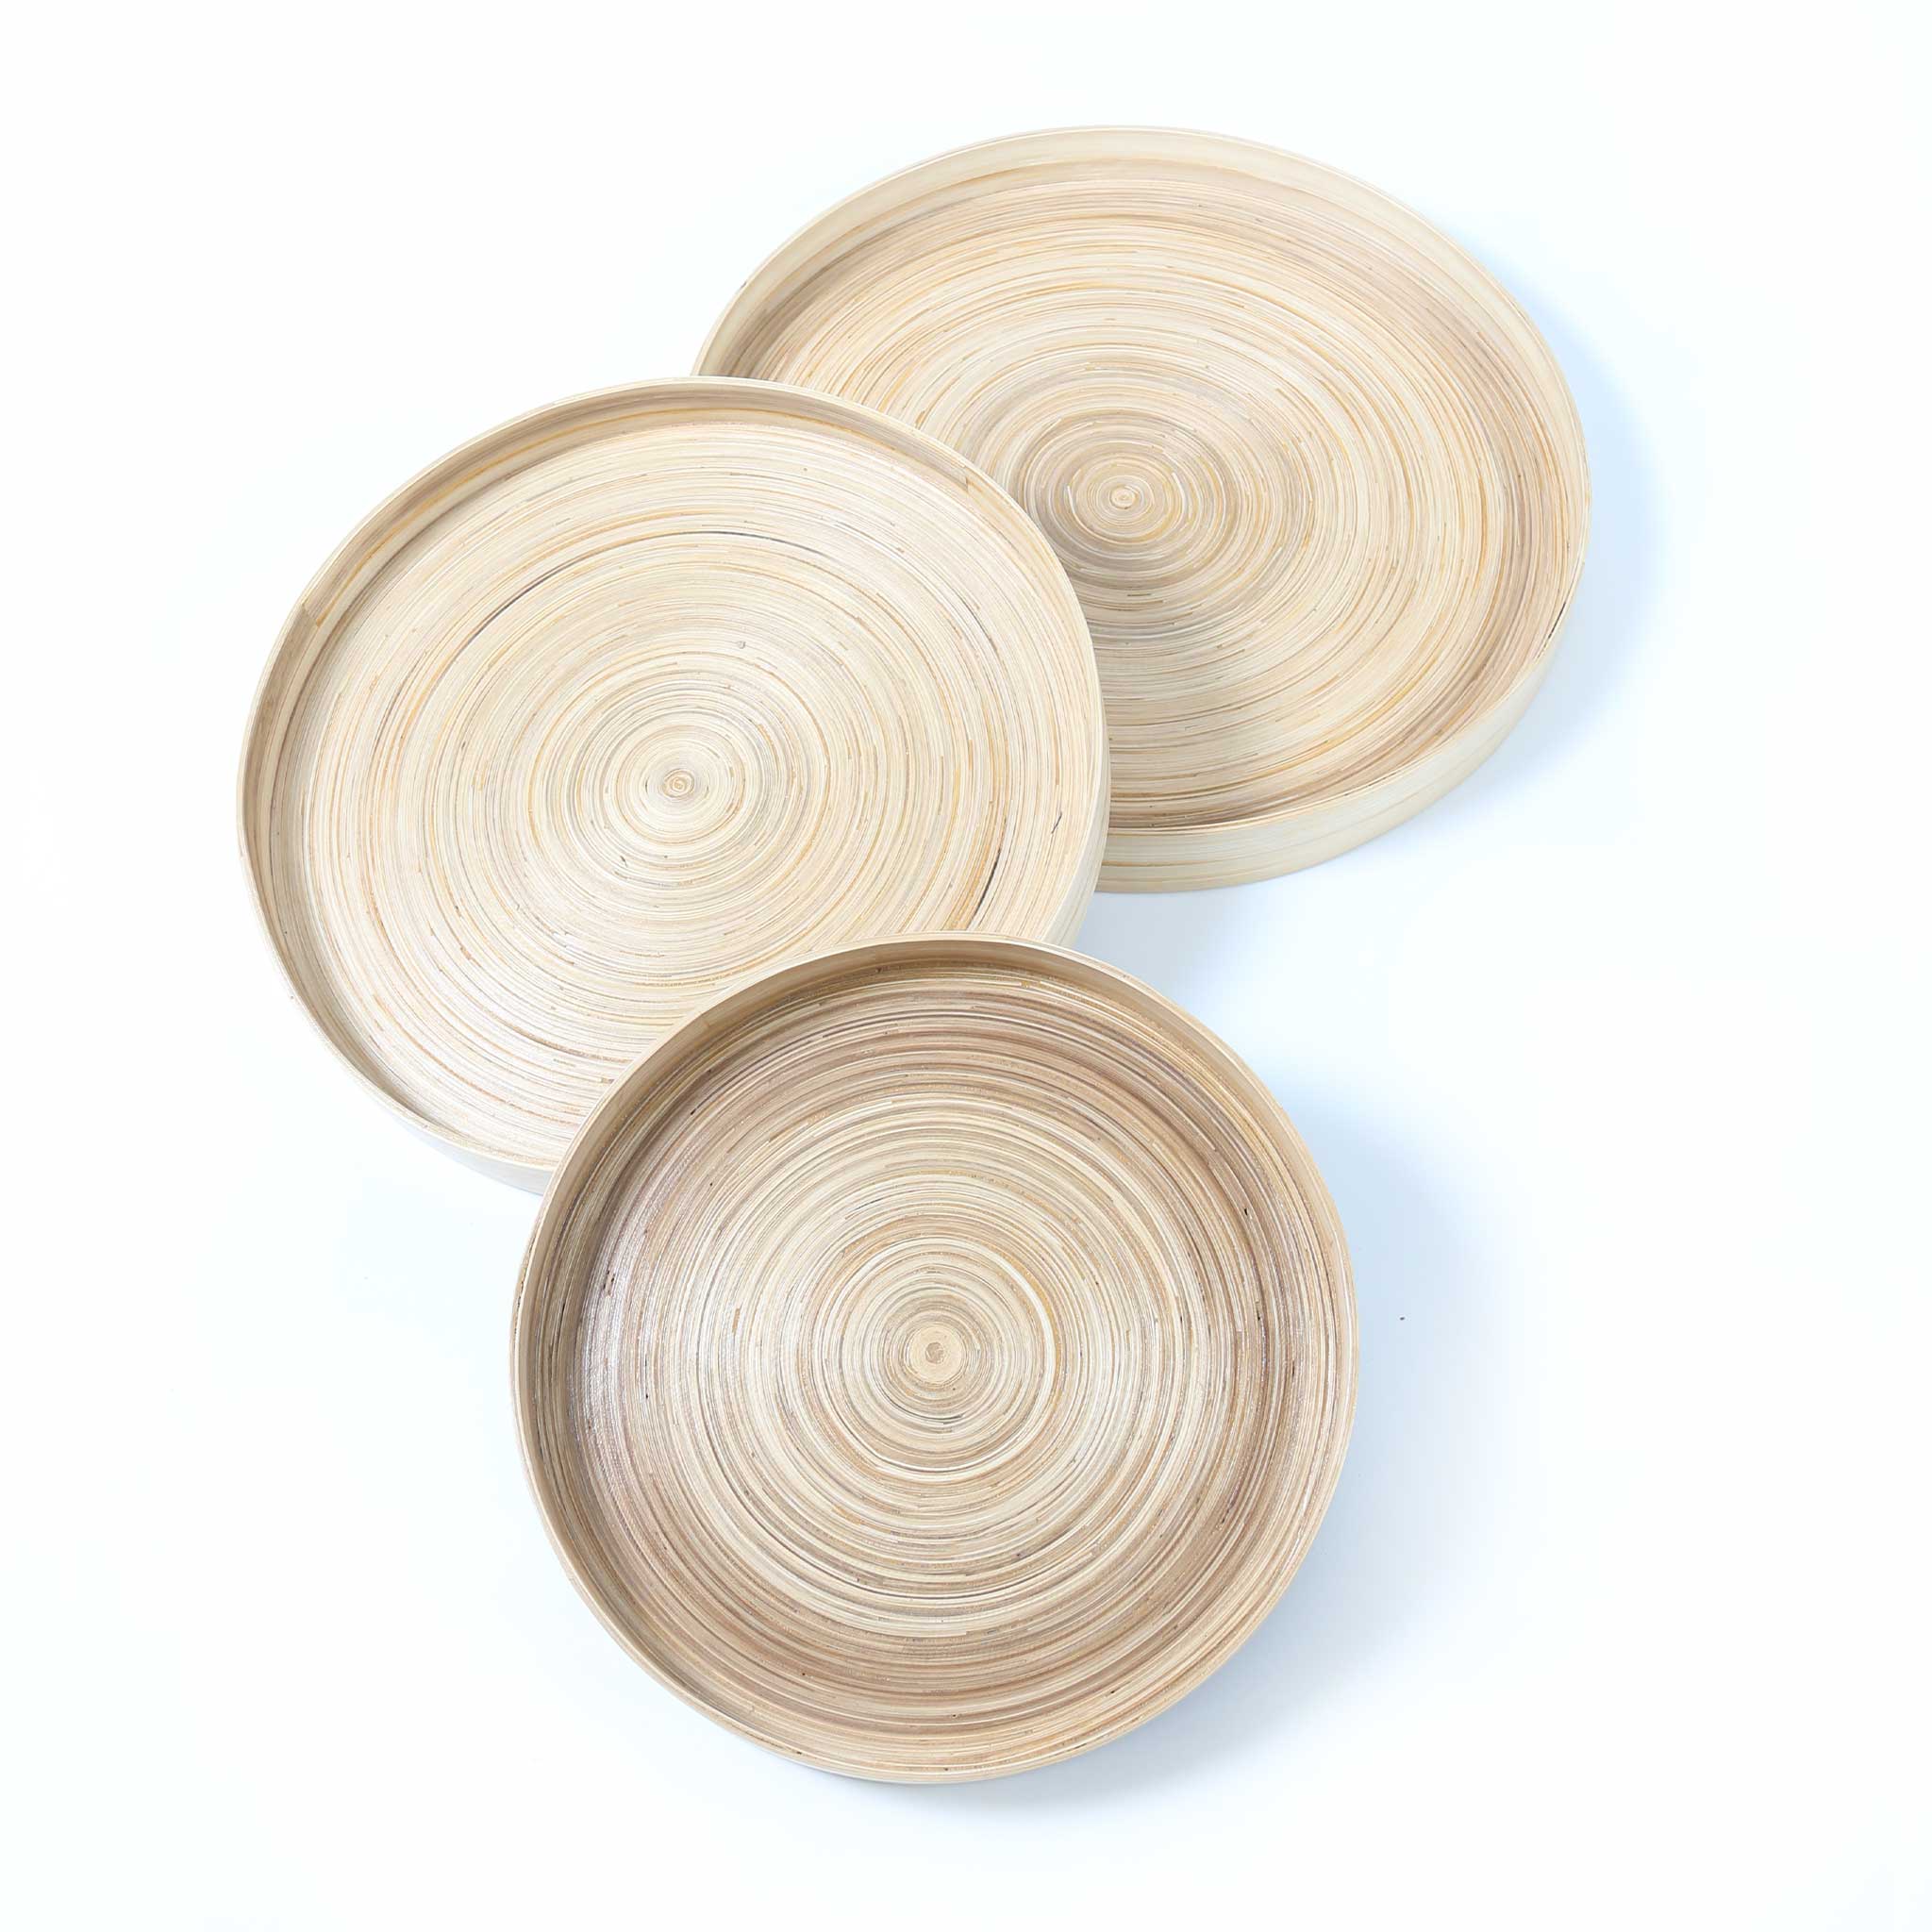 Laminated and Sustainable Bamboo Serving Tray